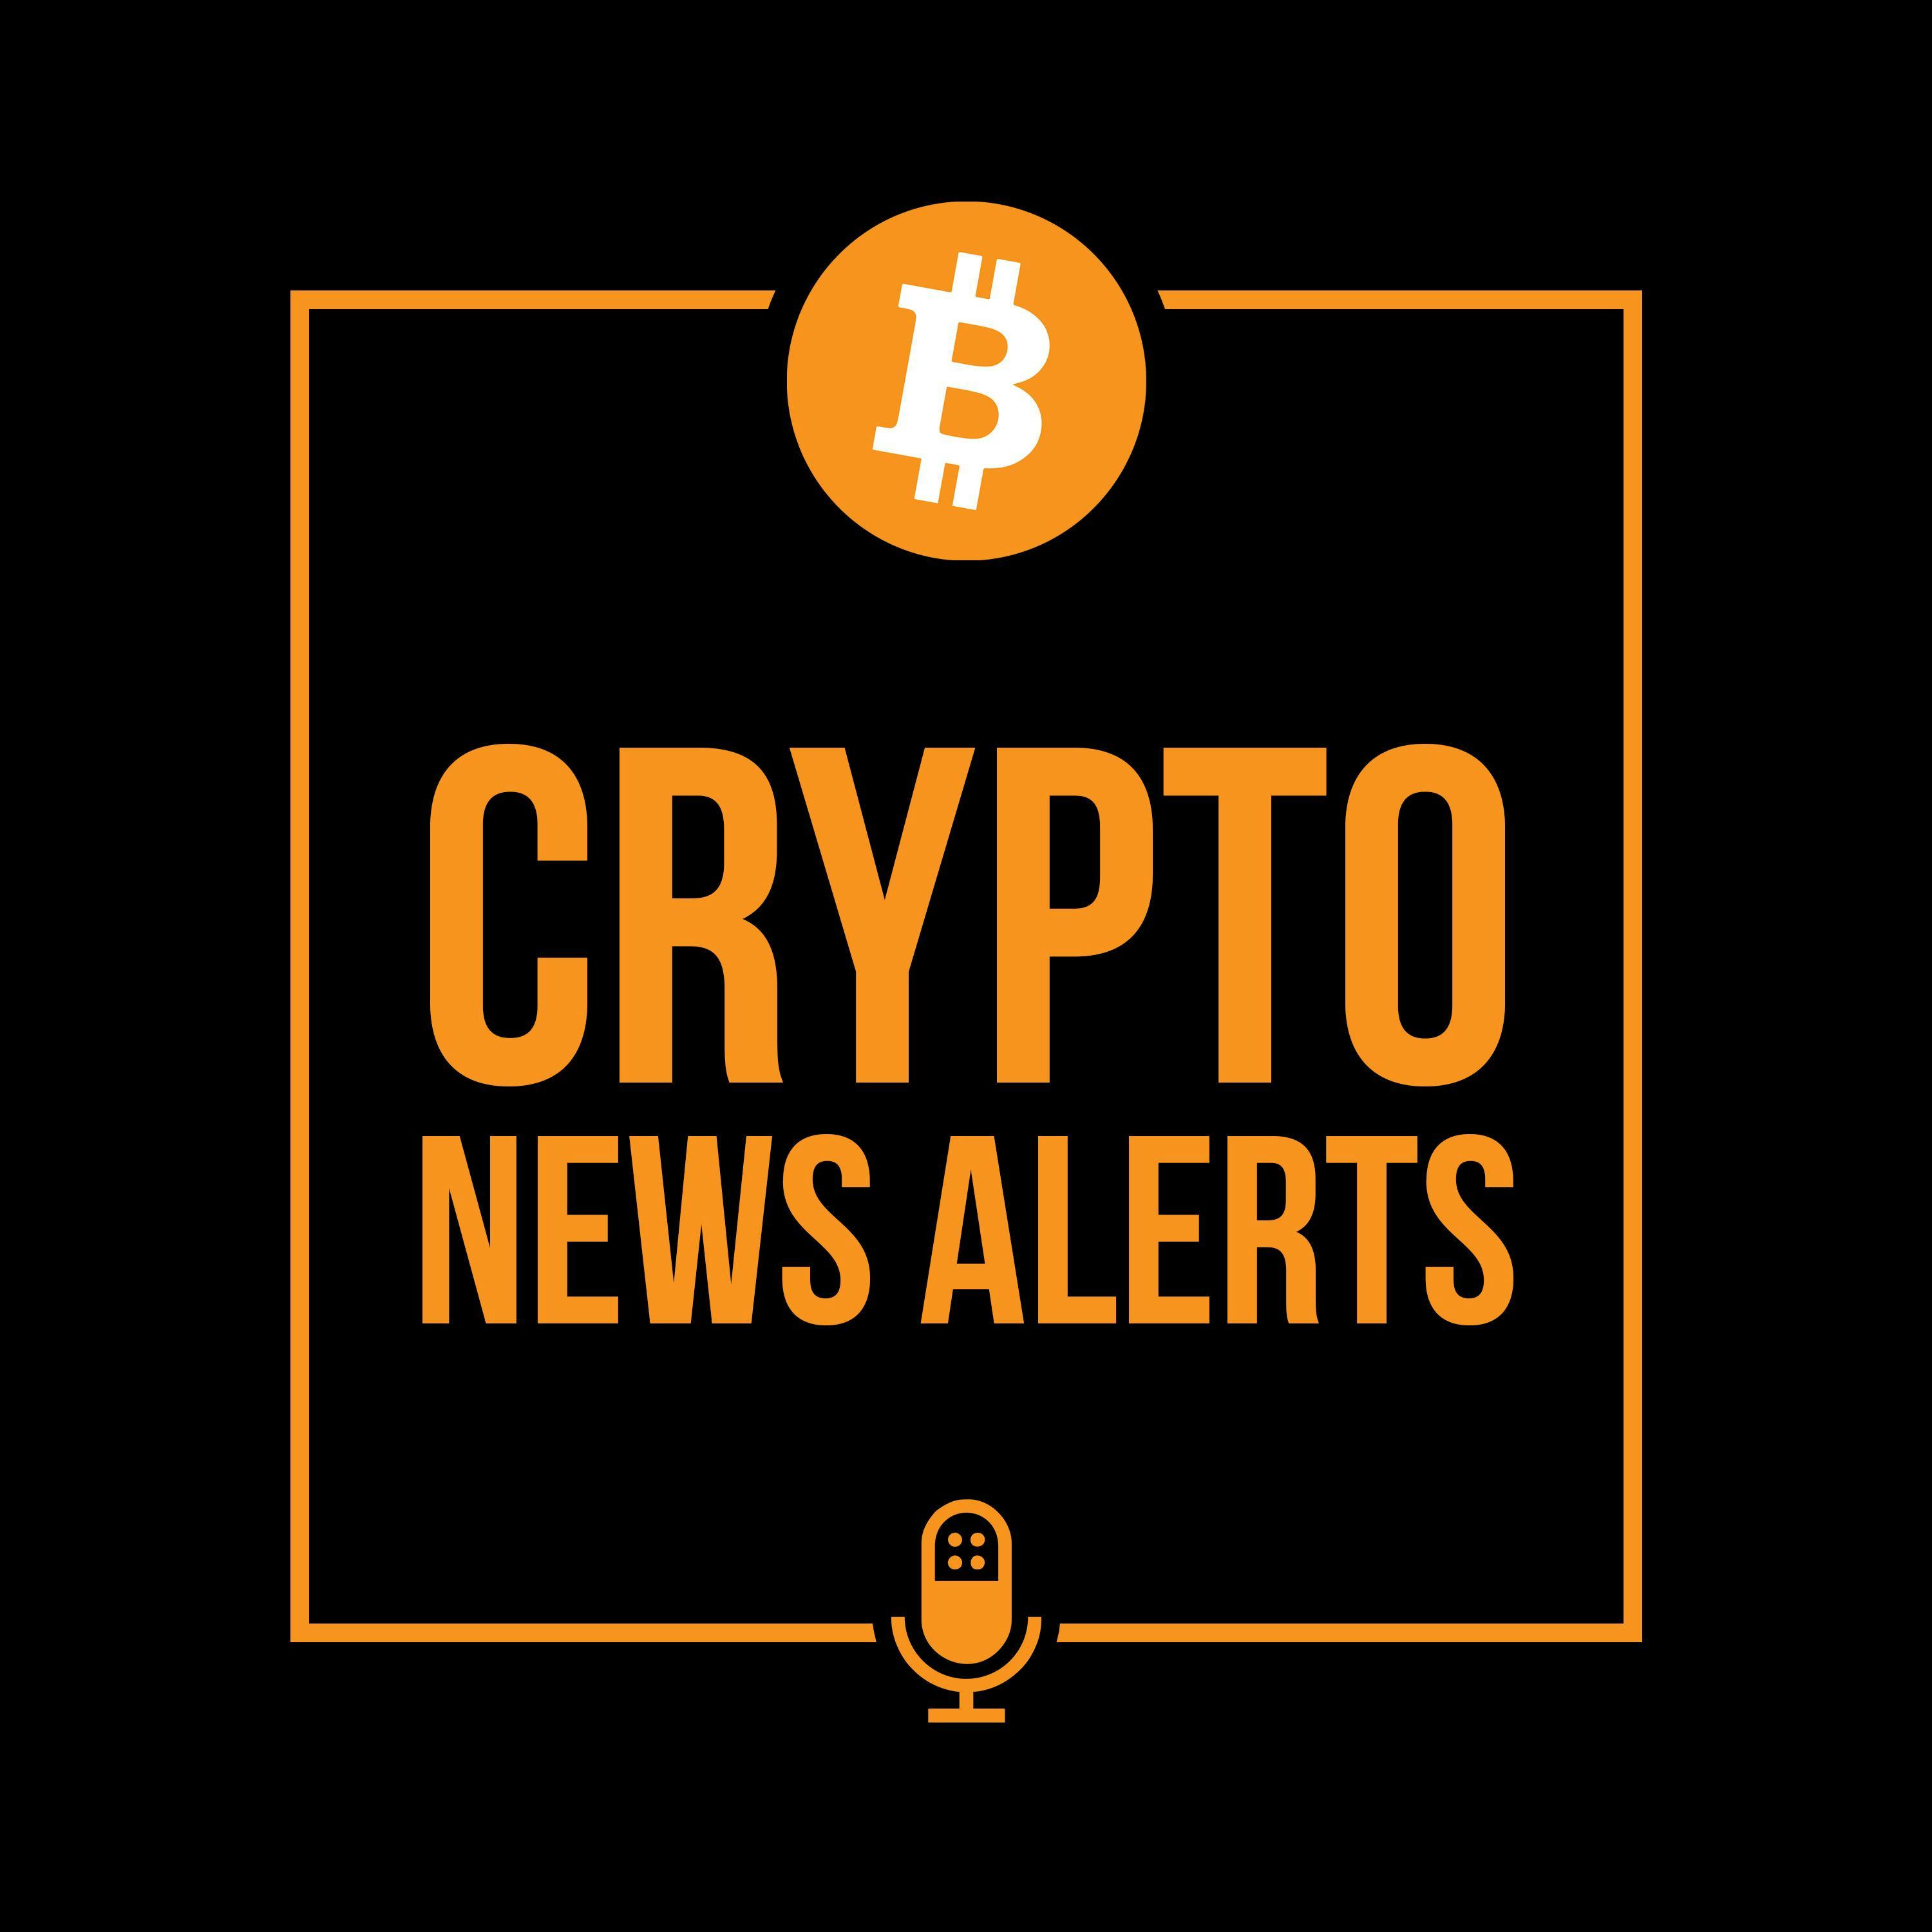 773: BITCOIN TESTS TRADERS’ NERVES AS TOP CRYPTO ANALYST REISSUES $450K BTC PRICE FORECAST!!